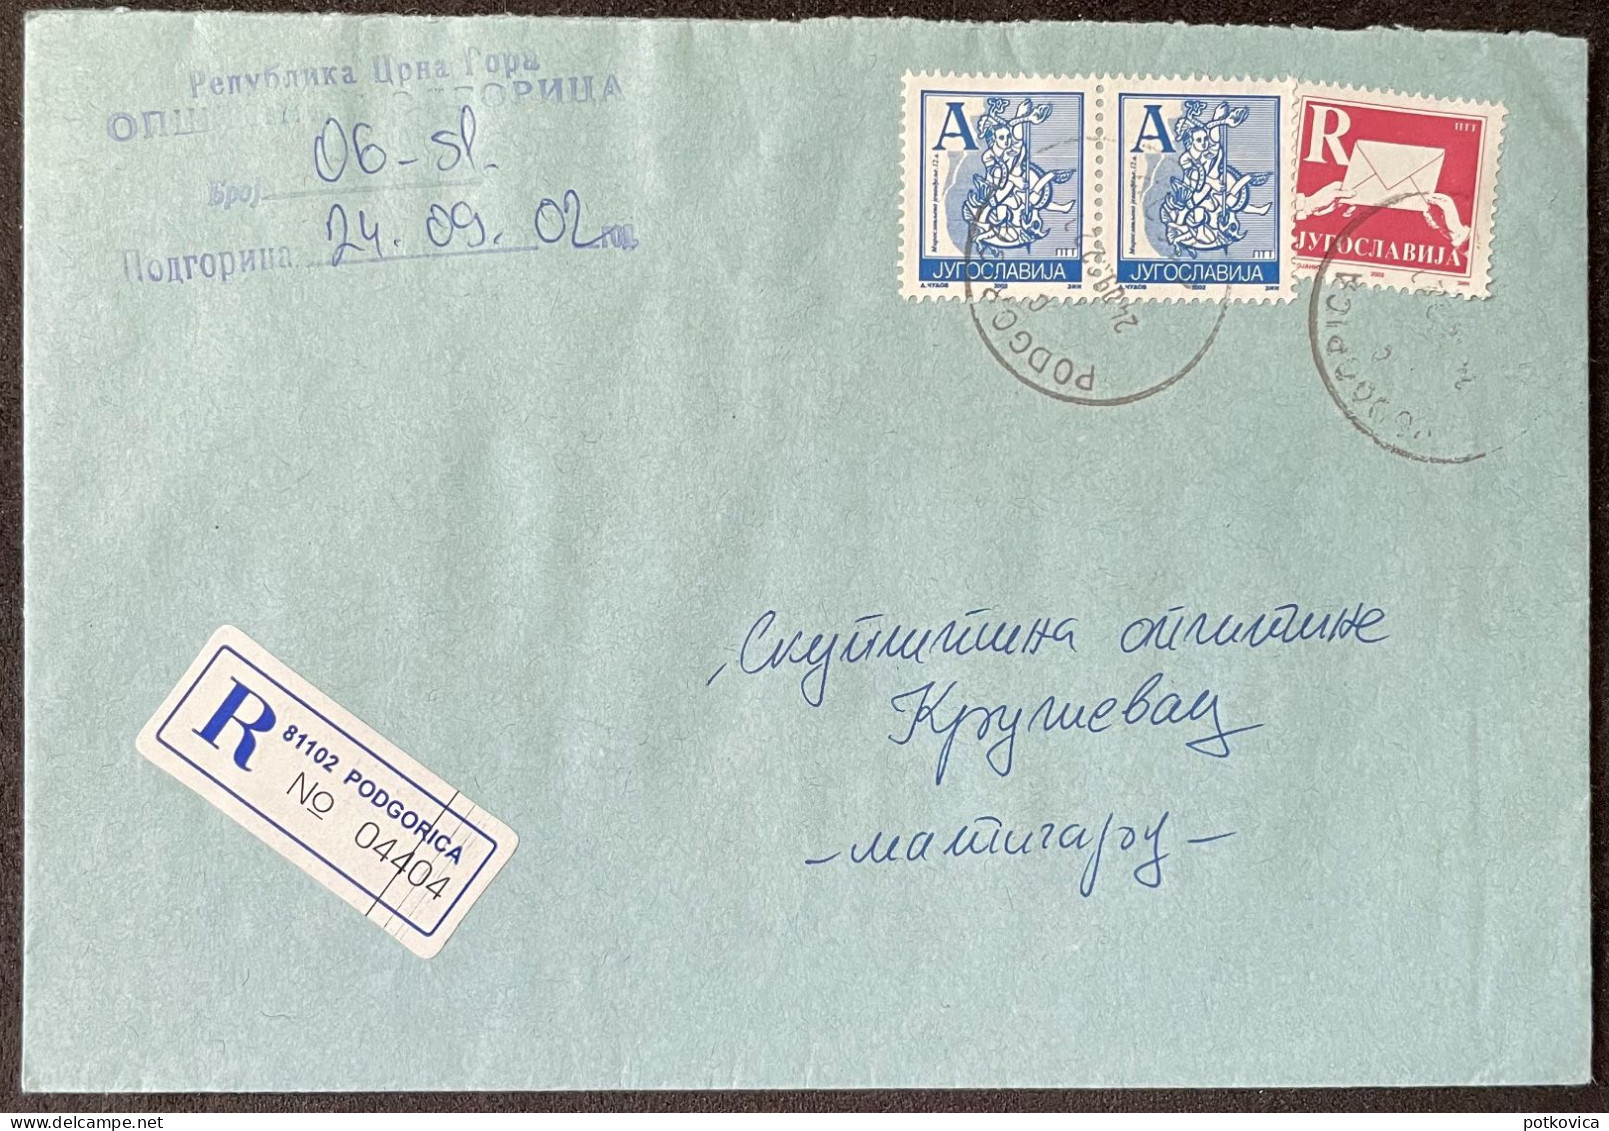 YUGOSLAVIA - OFFICIAL REGISTERED COVER - 2002. Red "R" And Blue "A" Stamps - Covers & Documents